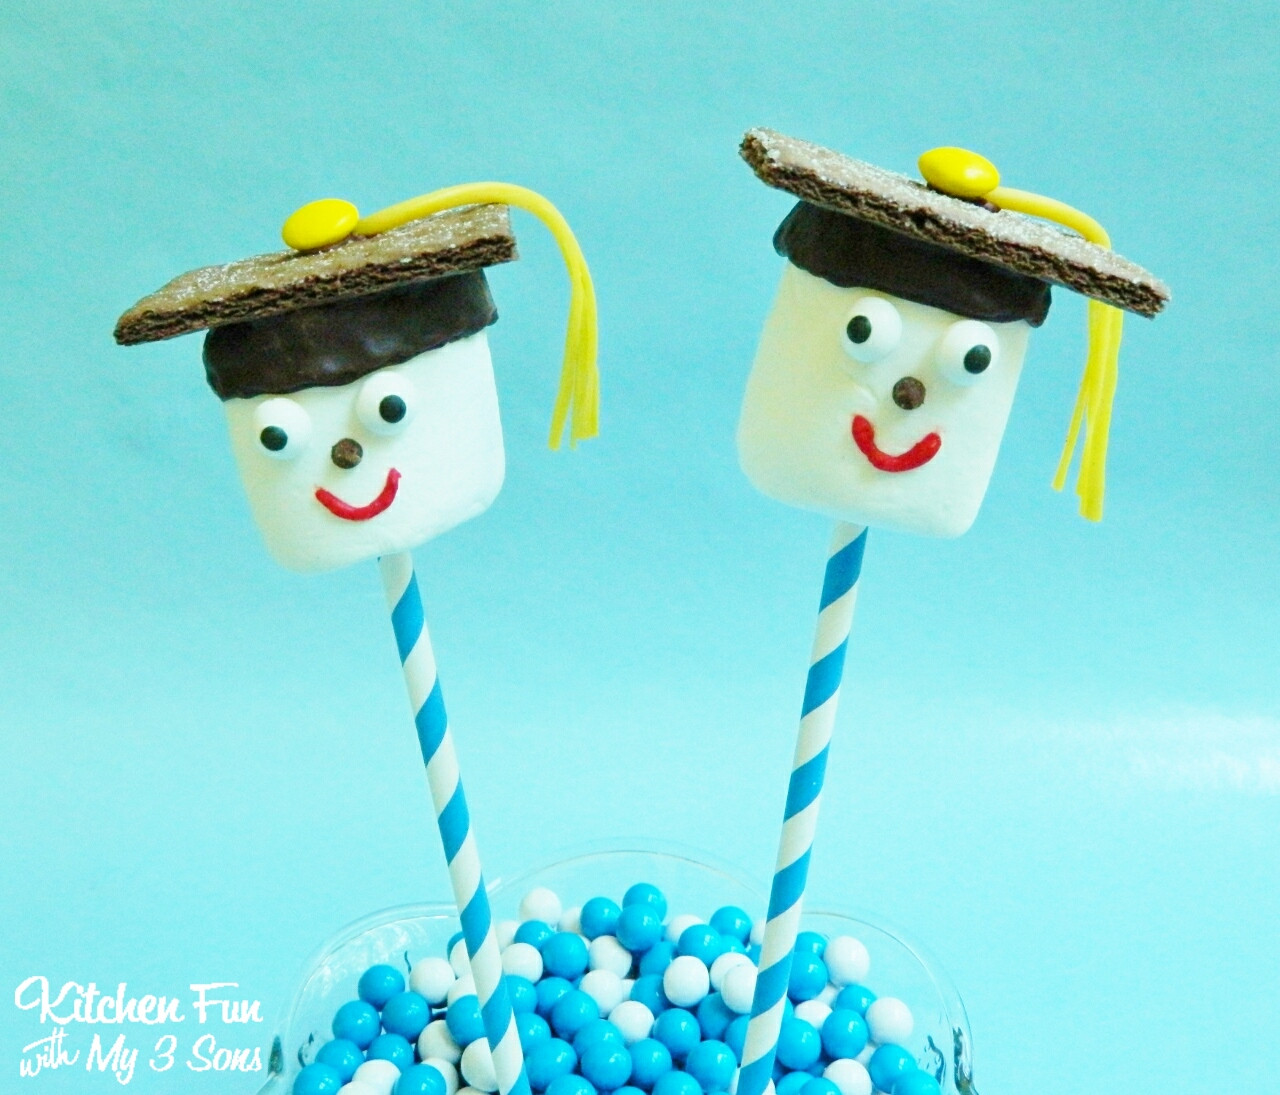 Easy Graduation Desserts
 10 of the BEST Desserts for a Graduation Party